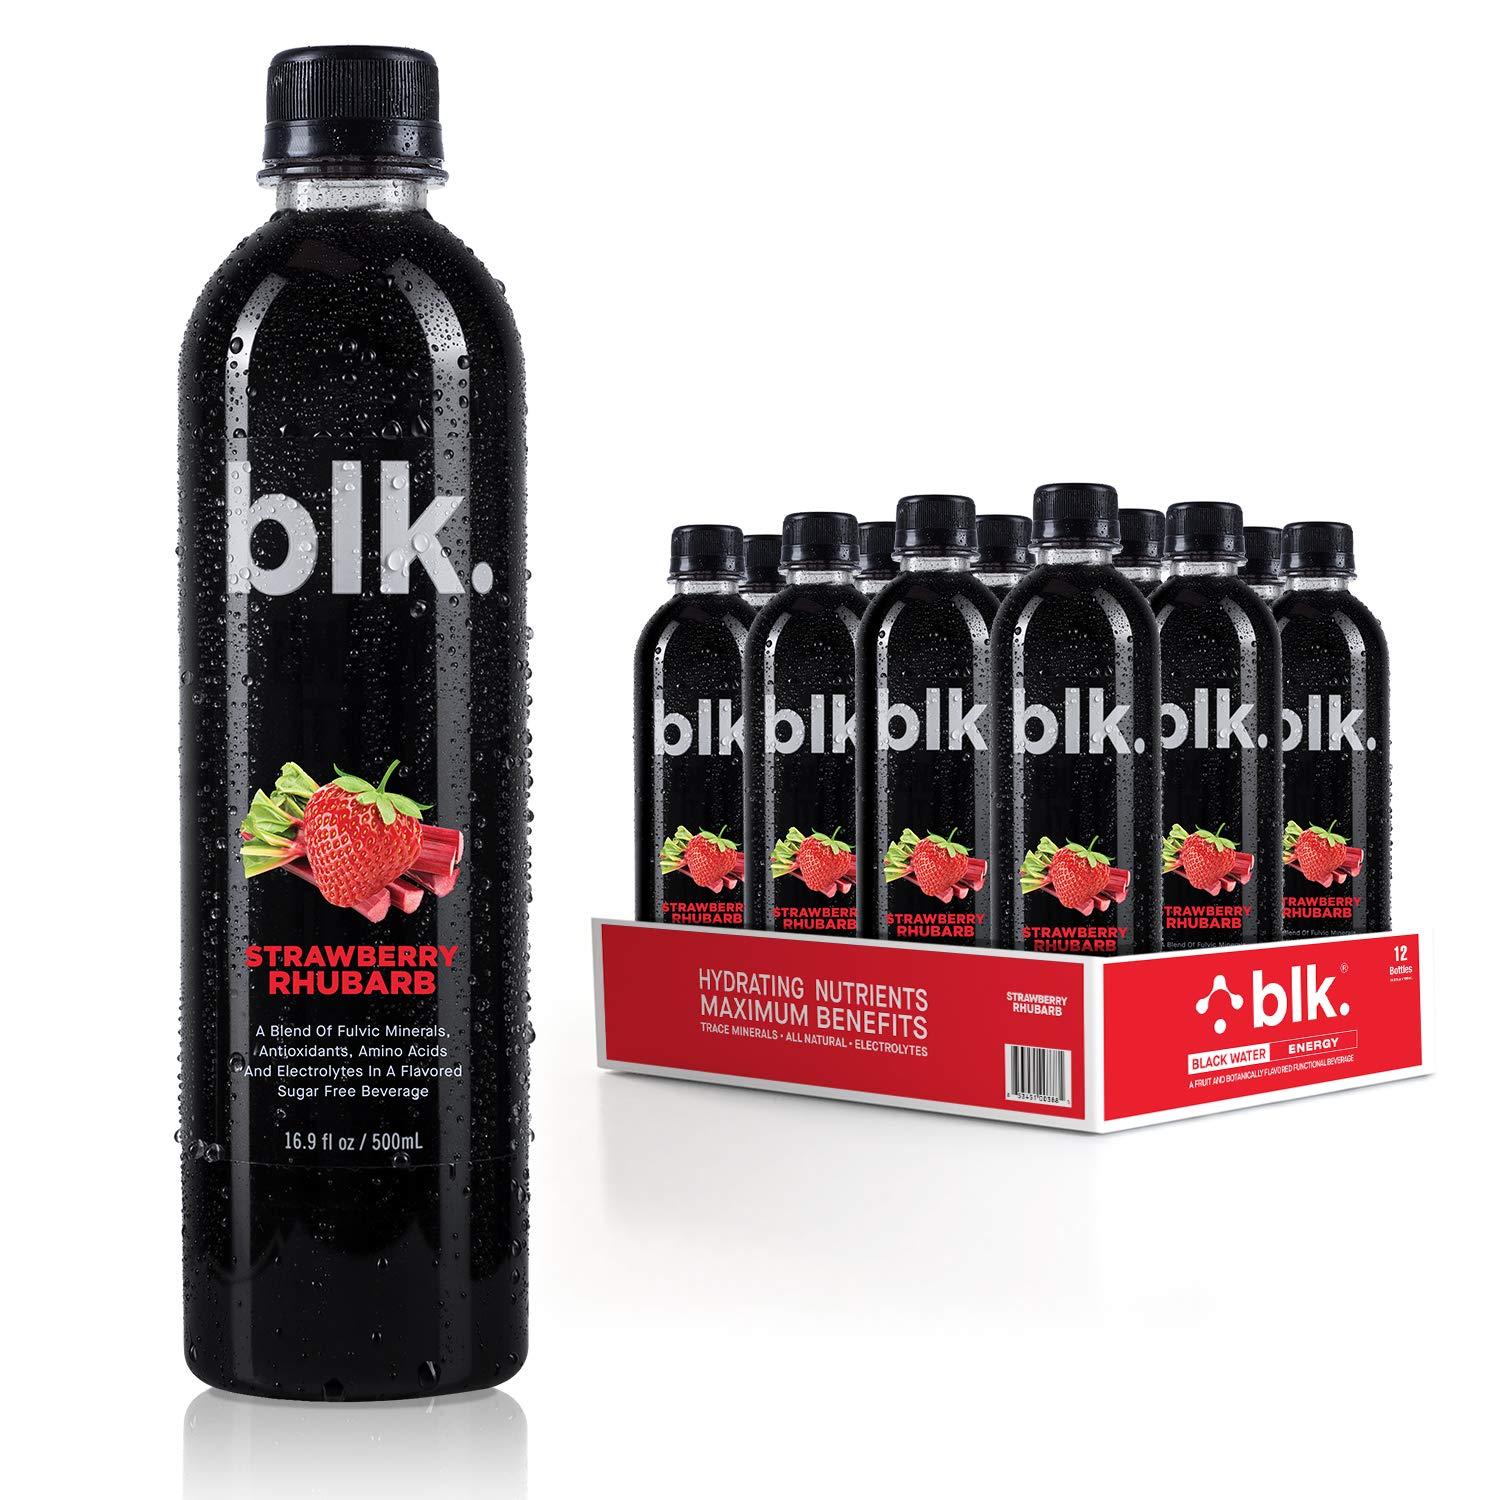 12 Blk Strawberry Rhubarb Flavored Water for $8.99 Shipped